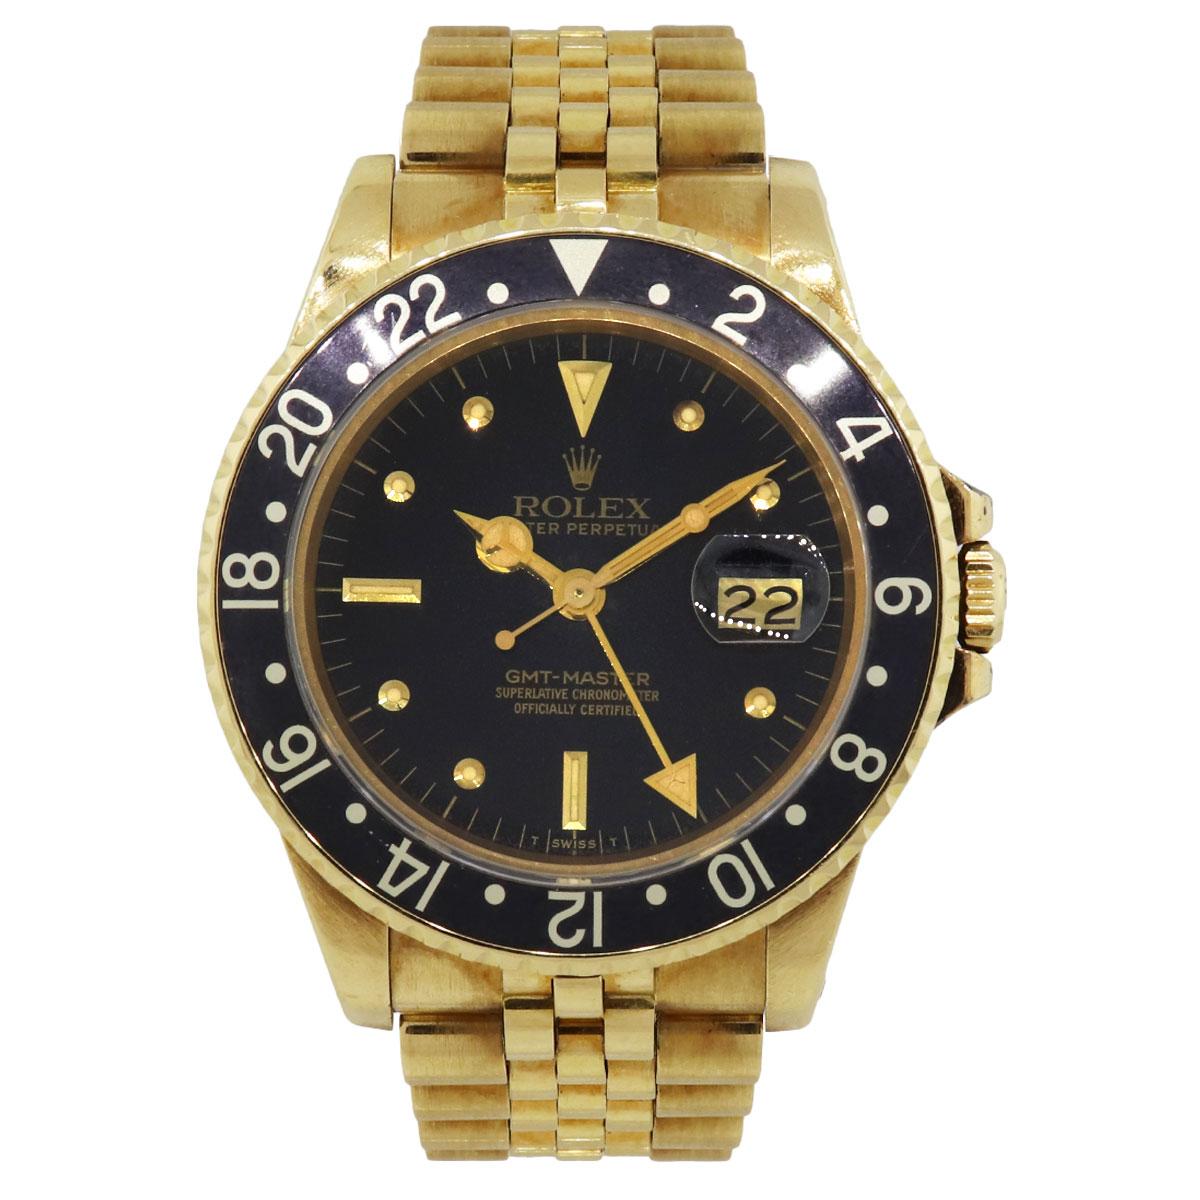 Brand: Rolex
Model: GMT-Master
MPN: 16758
Serial: 8 million serial
Dial: Black nipple dial
Bezel: Black bi-directional bezel
Case Measurements: 40mm
Bracelet: 18k yellow gold jubilee band
Clasp: Fold over concealed clasp
Movement: Automatic
Size: